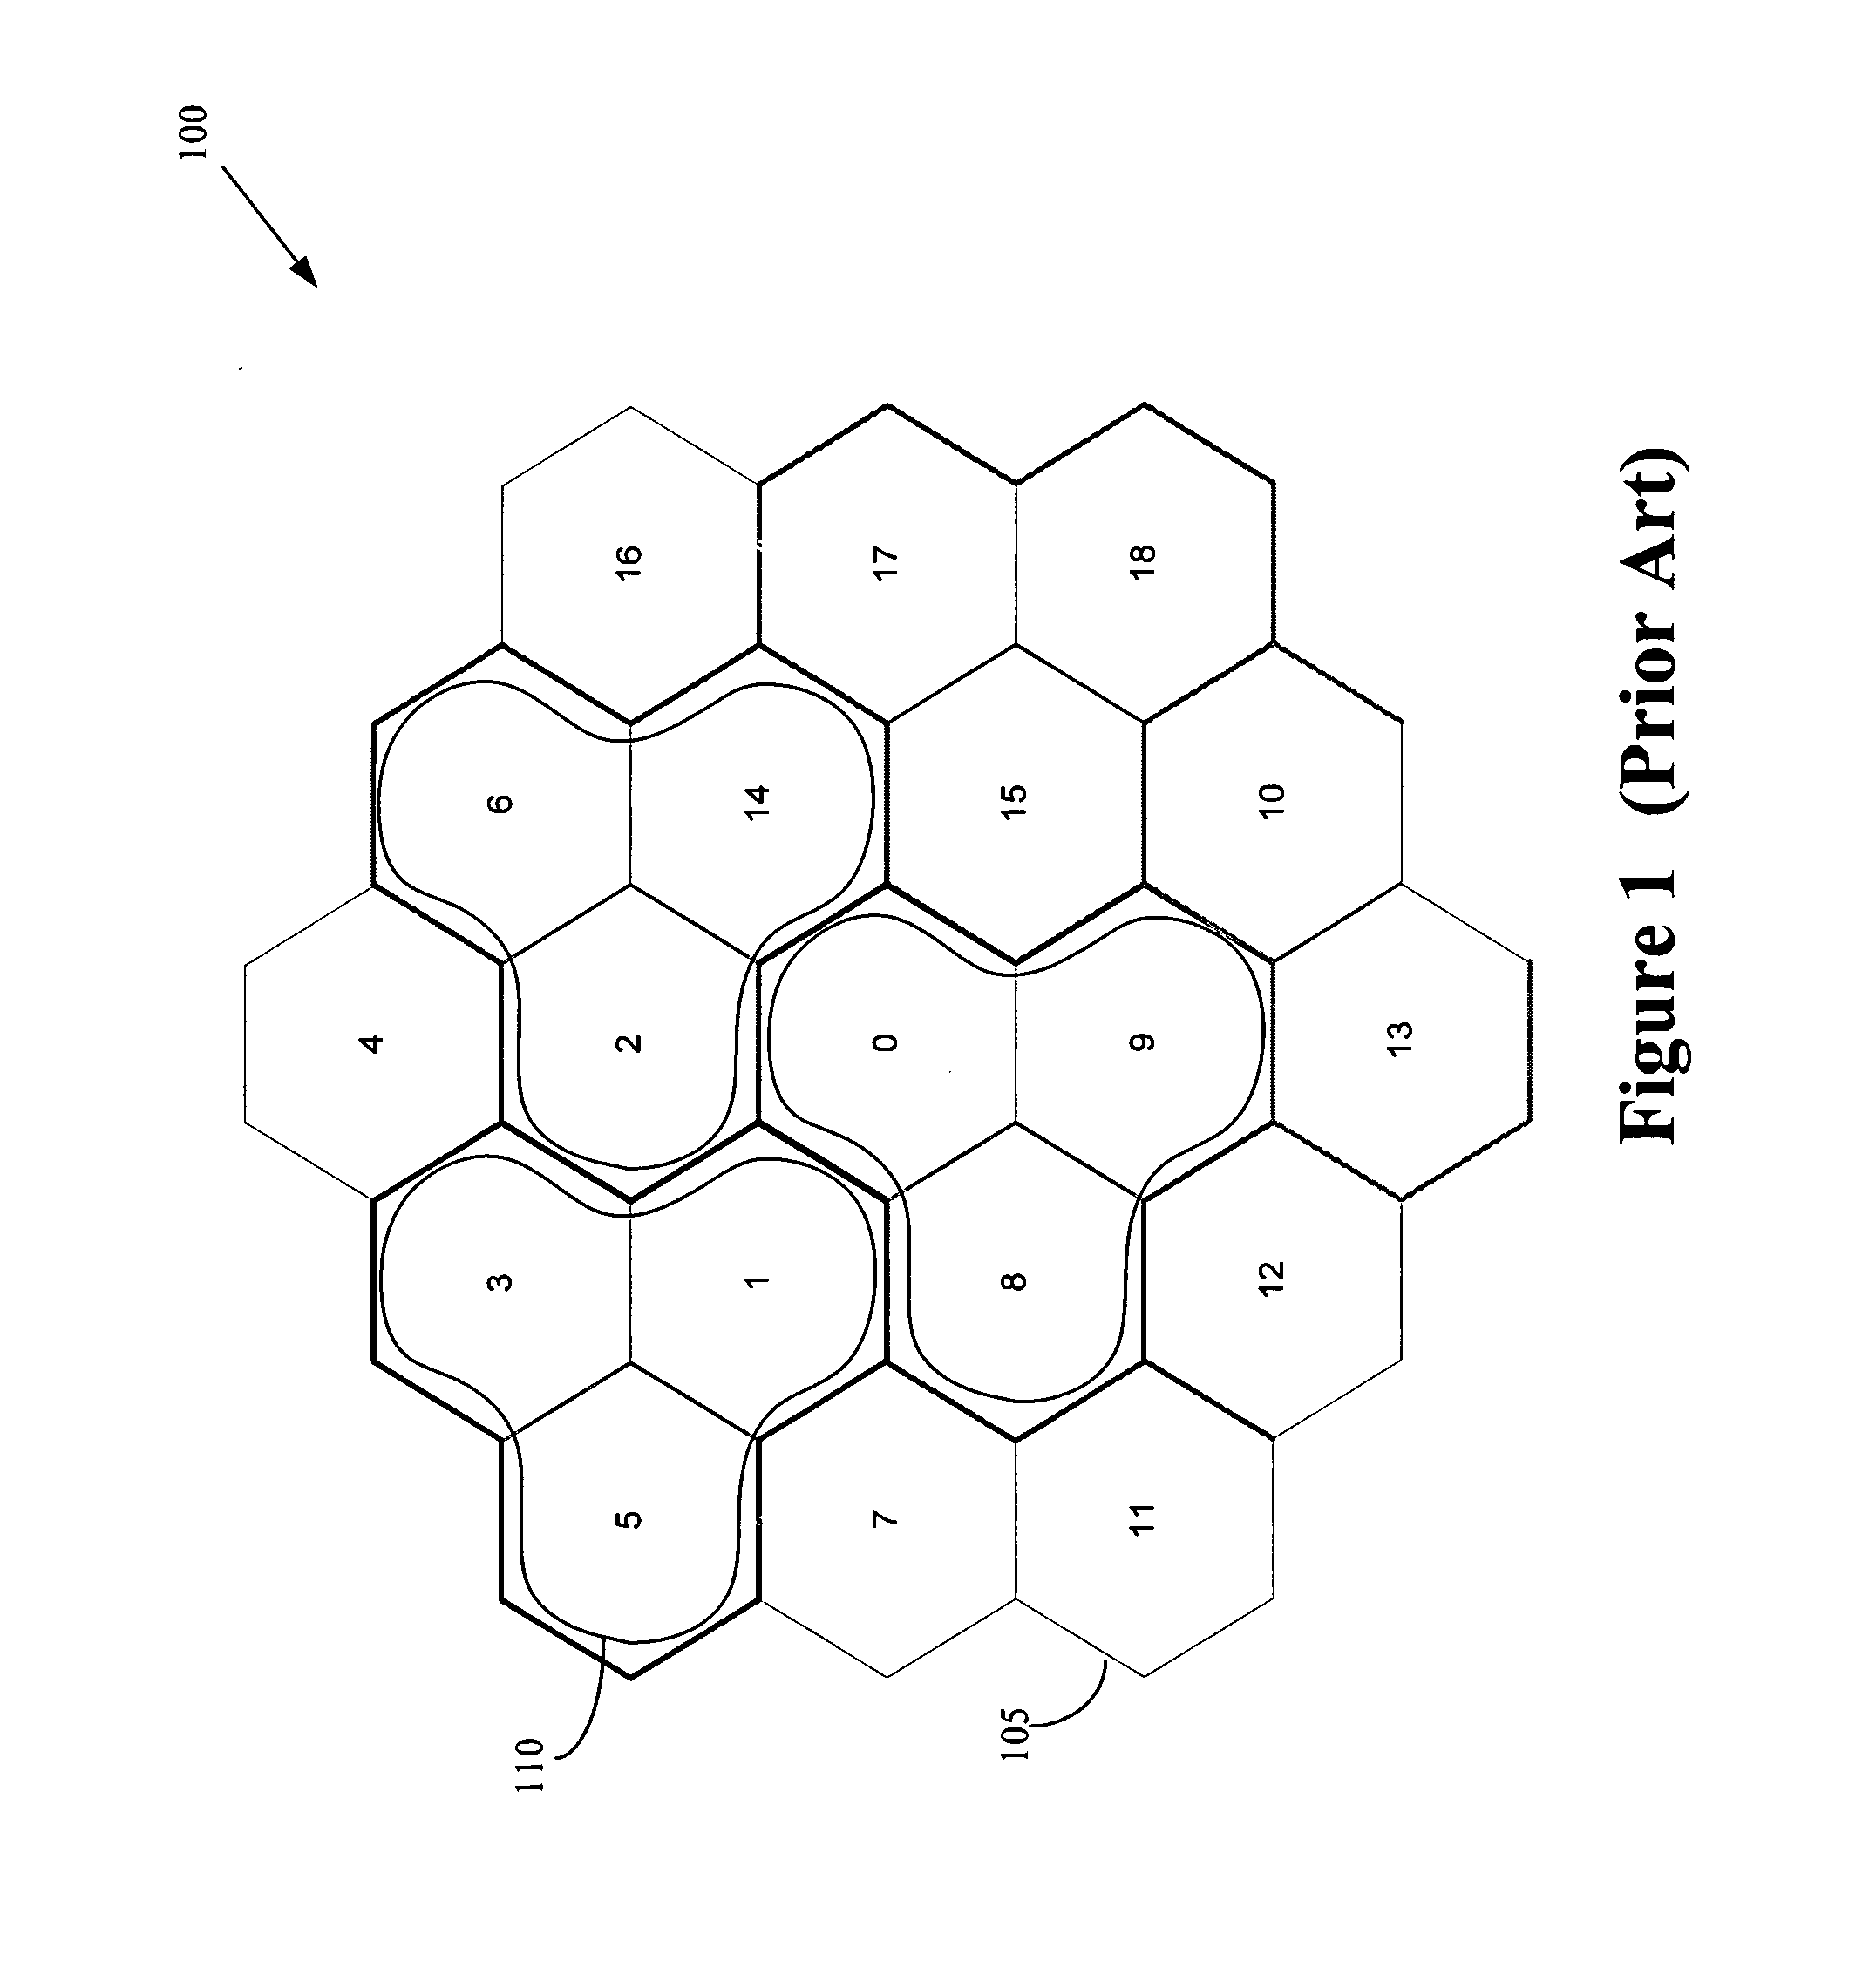 Method for adaptive formation of cell clusters for cellular wireless networks with coordinated transmission and reception